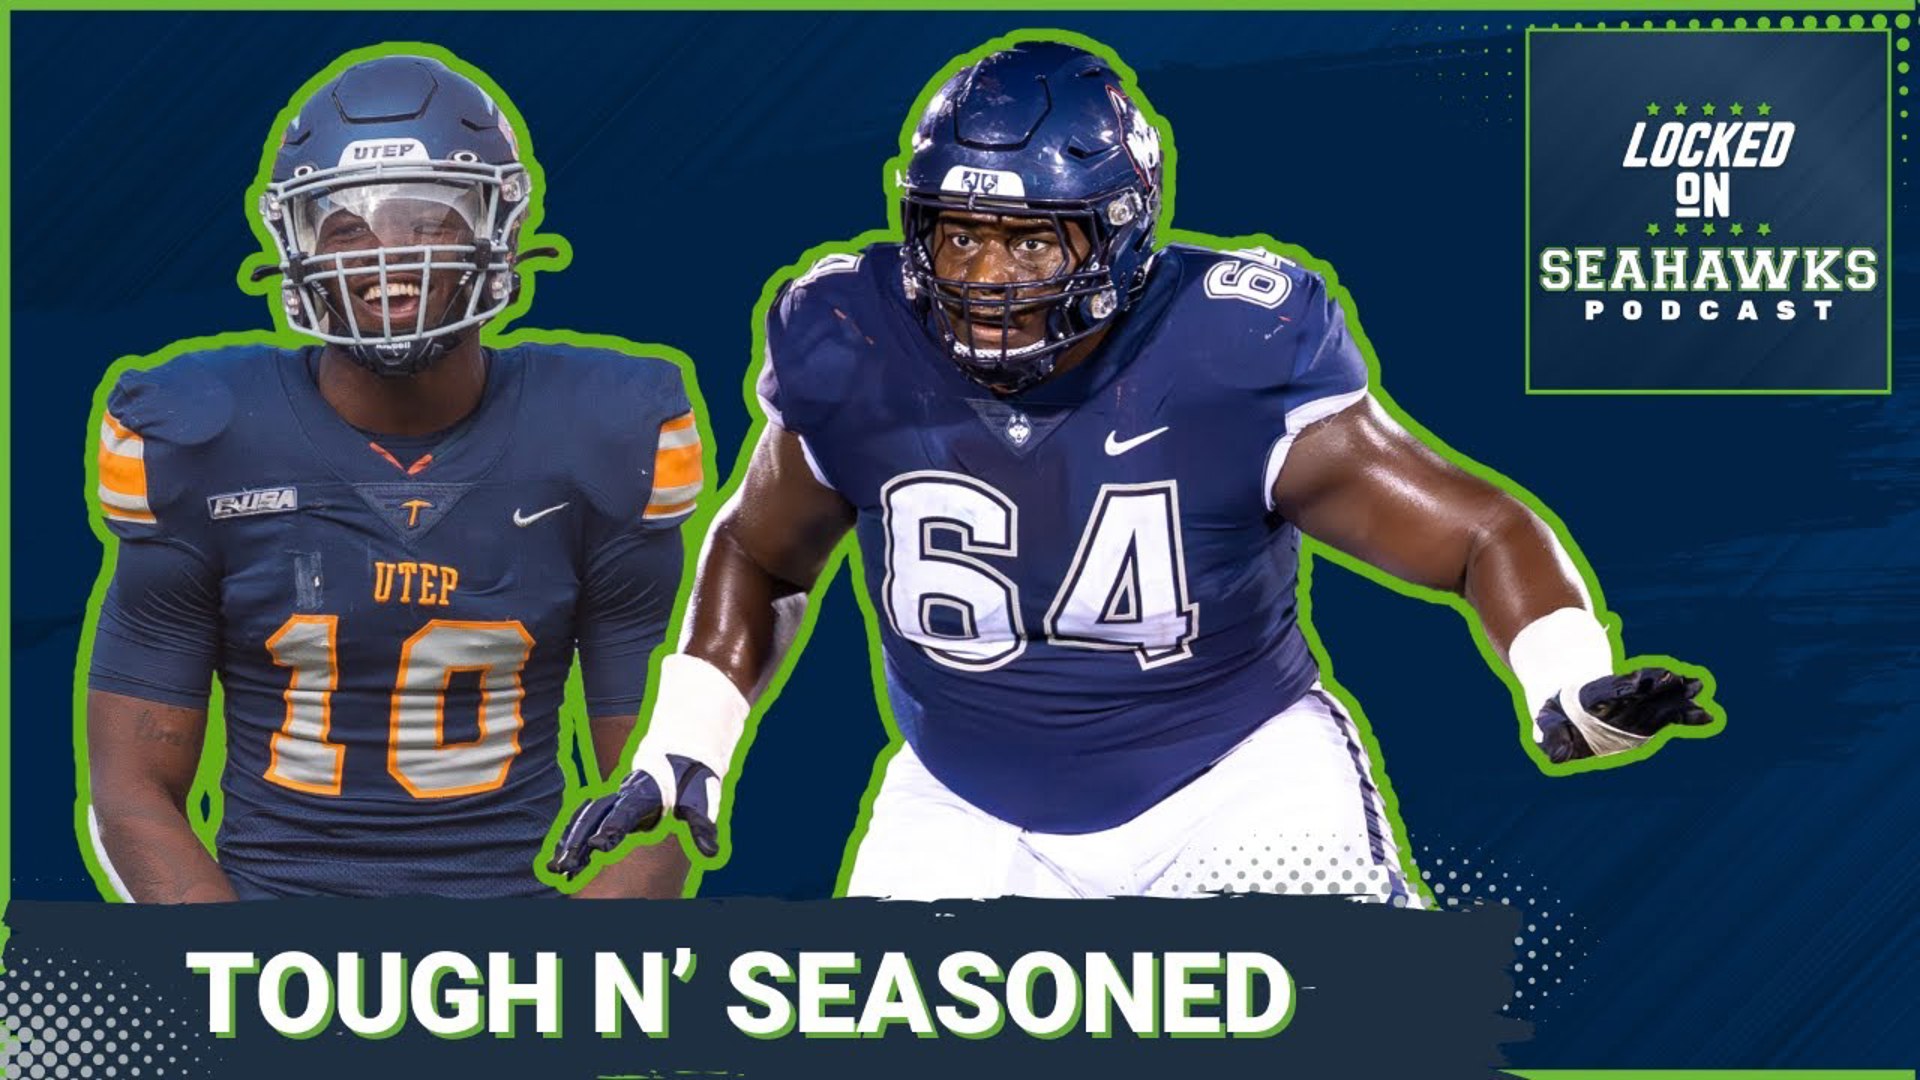 NFL Draft Takeaways Seattle Seahawks Pursue Toughness, Experience in Day 2/Day 3 cbs19.tv